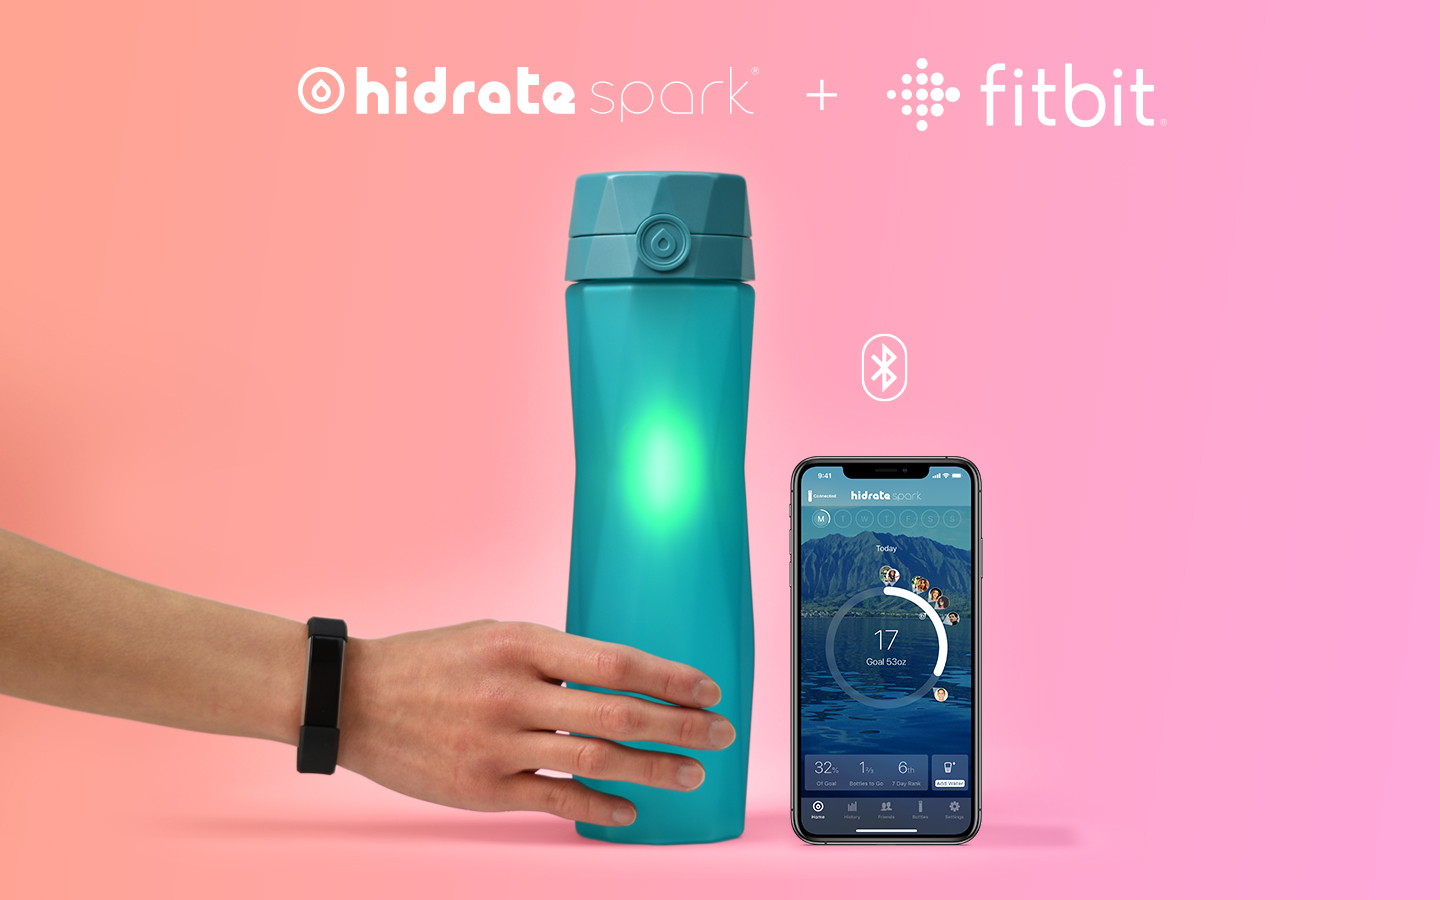 fitbit thermos